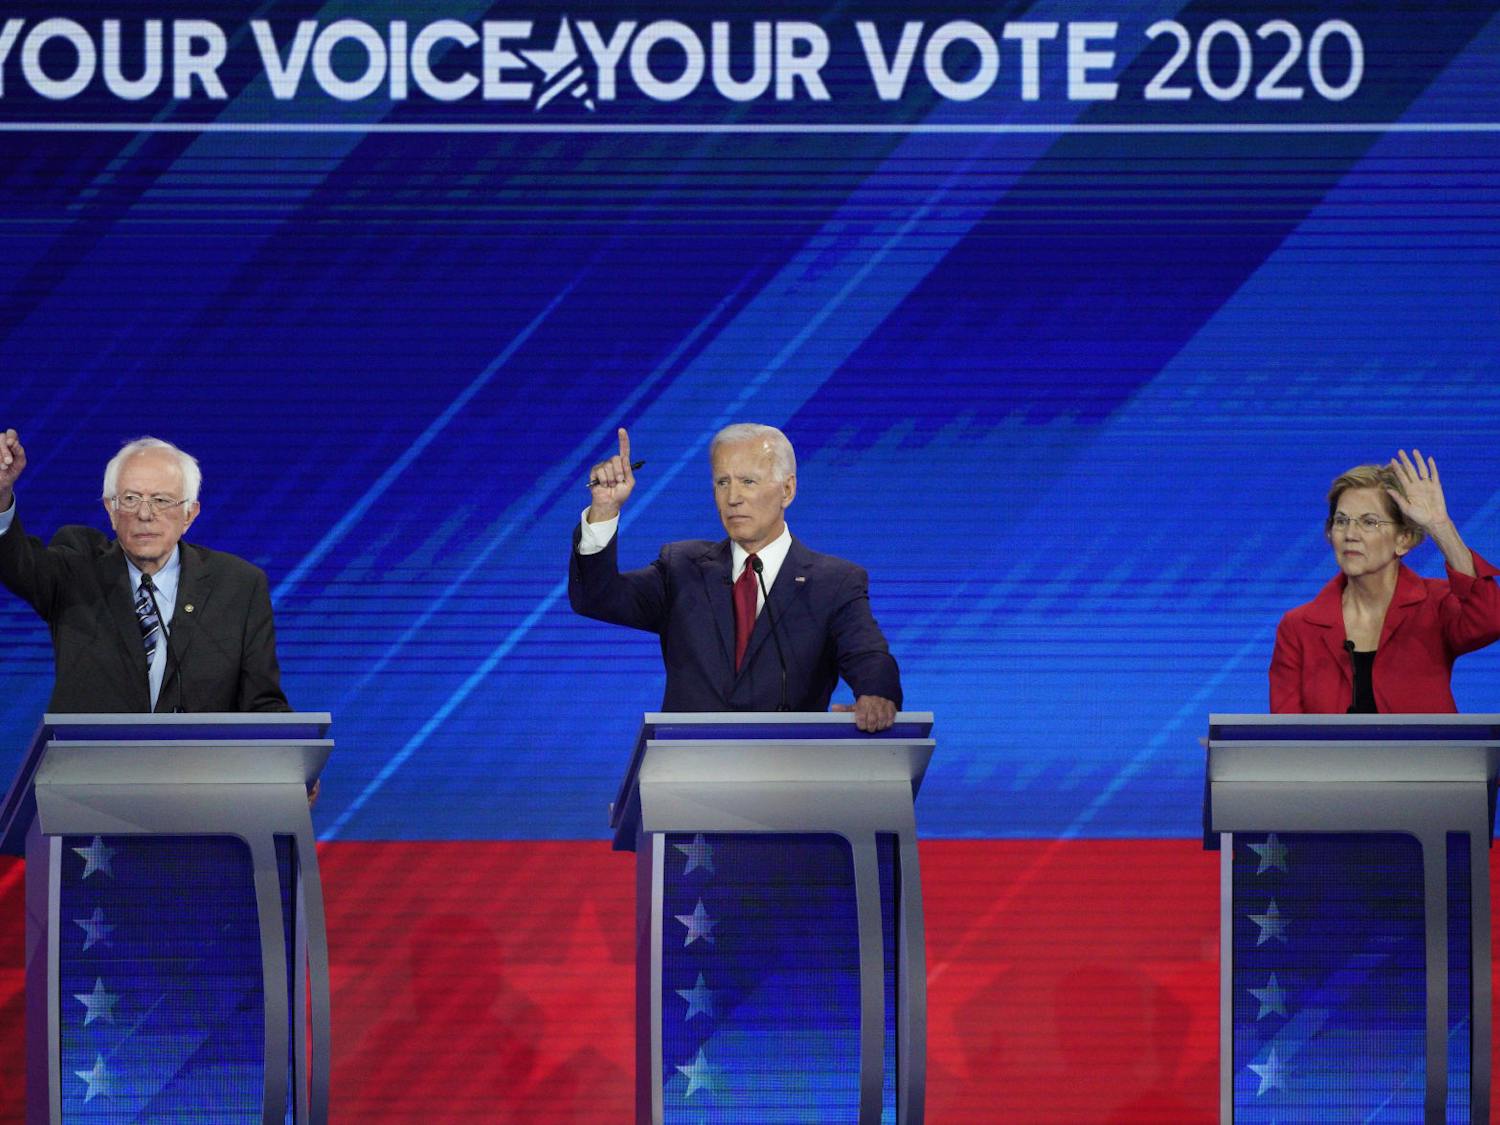 From left, Democratic presidential candidates Sen. Bernie Sanders, I-Vt., former Vice President Joe Biden and Sen. Elizabeth Warren, D-Mass. raise their hands to answer a question Thursday, Sept. 12, 2019, during a Democratic presidential primary debate hosted by ABC at Texas Southern University in Houston. (AP Photo/David J. Phillip)